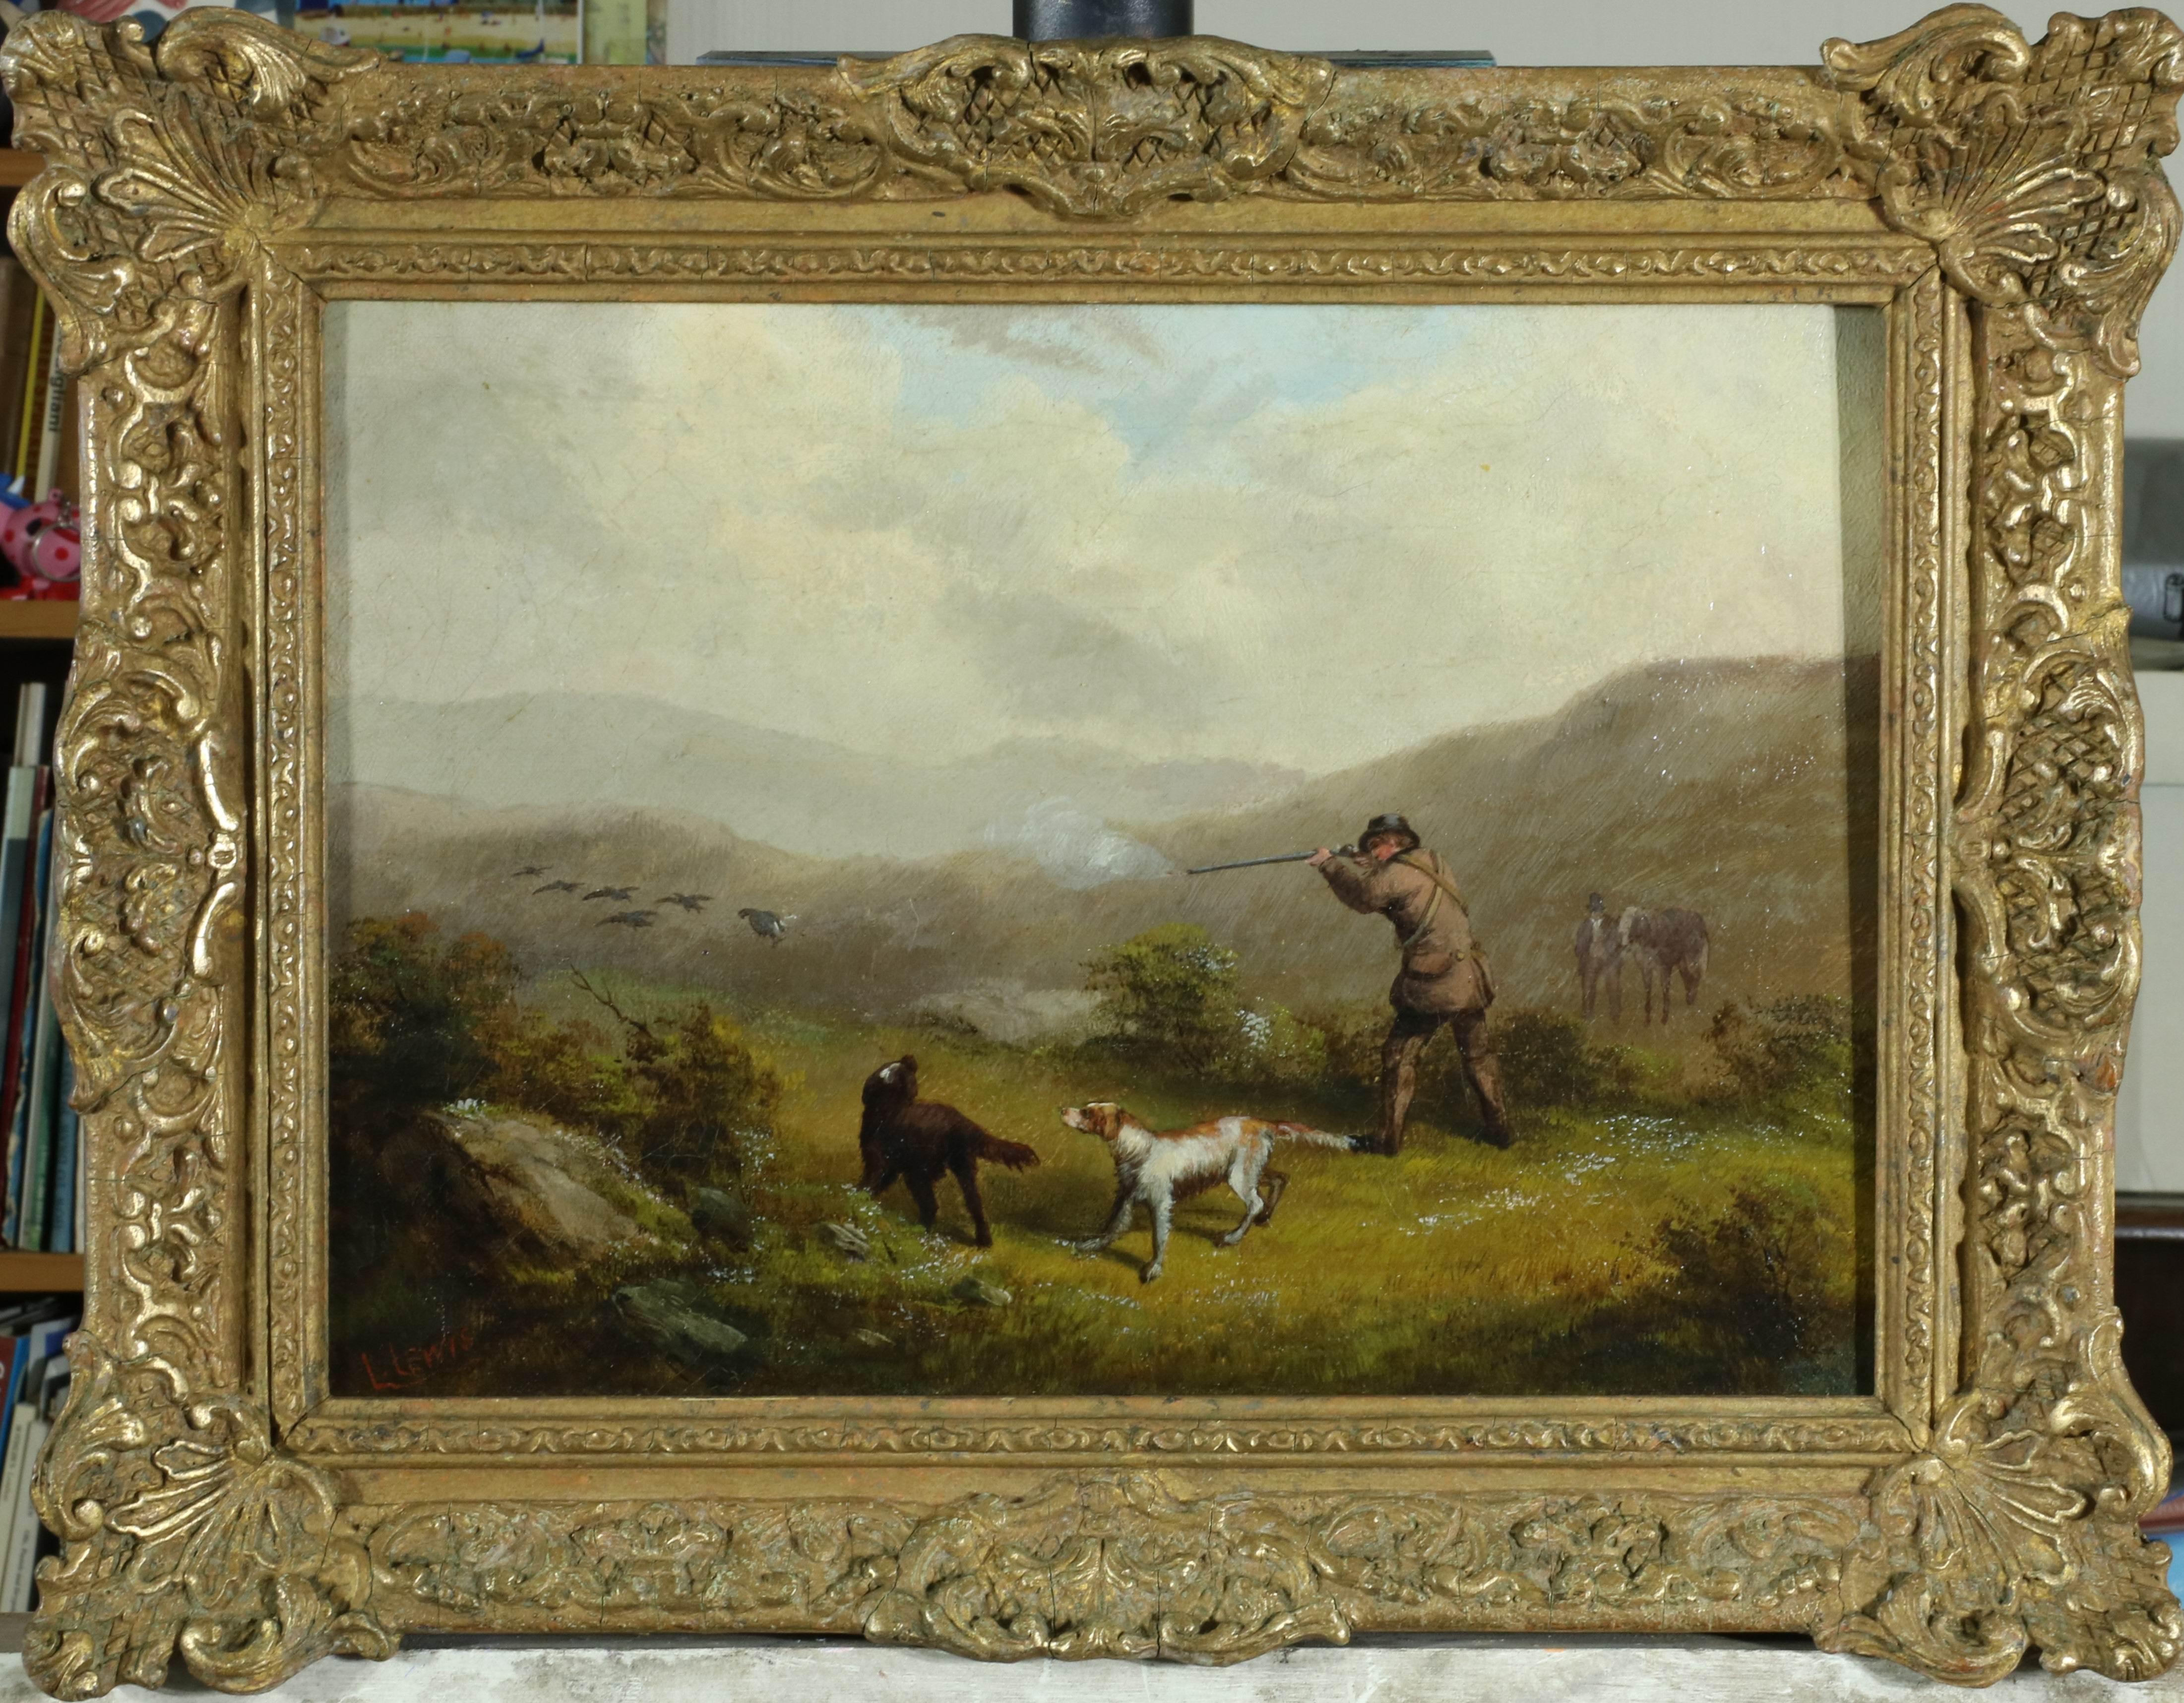 C19 Grouse Shoot Gun with Hunting Dogs and grouse in hilly landscape, Oil  - Painting by Lennard Lewis